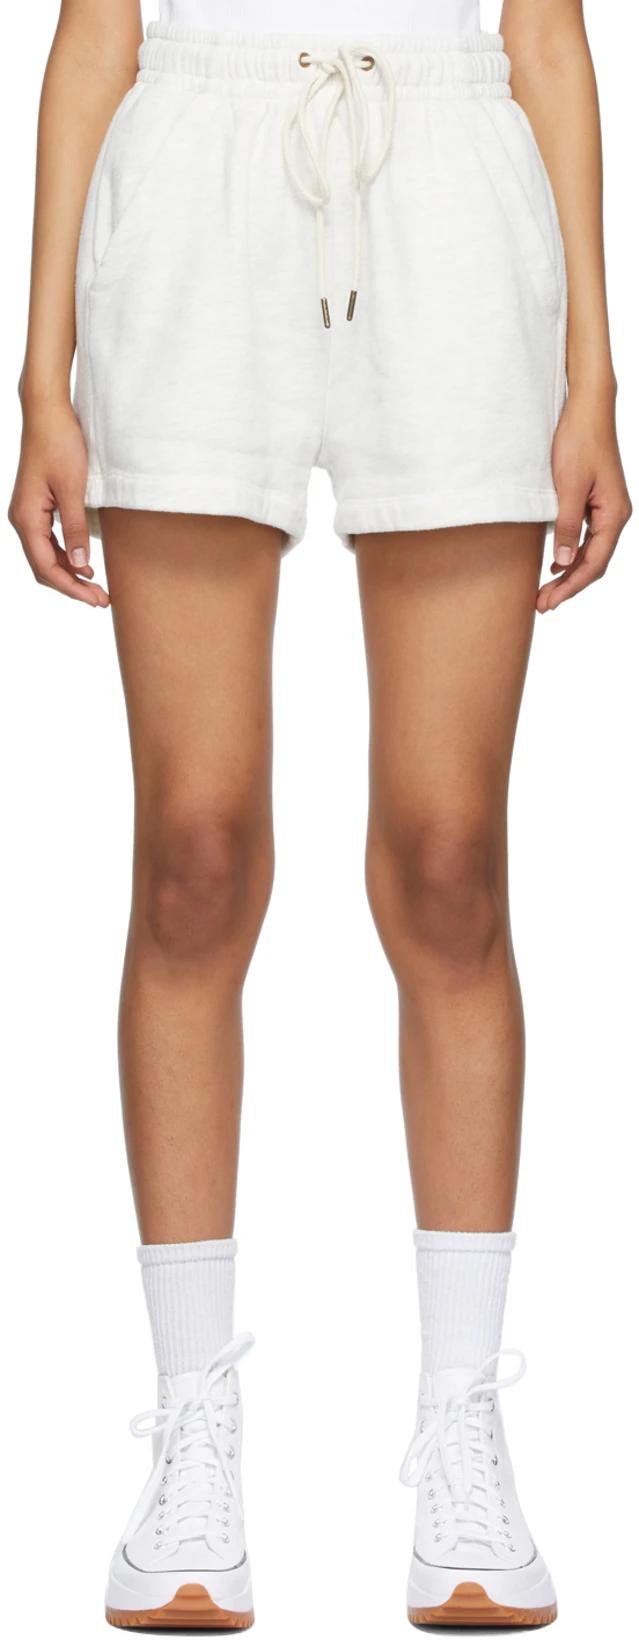 Off-White Fleece Olympia Shorts by CITIZENS OF HUMANITY